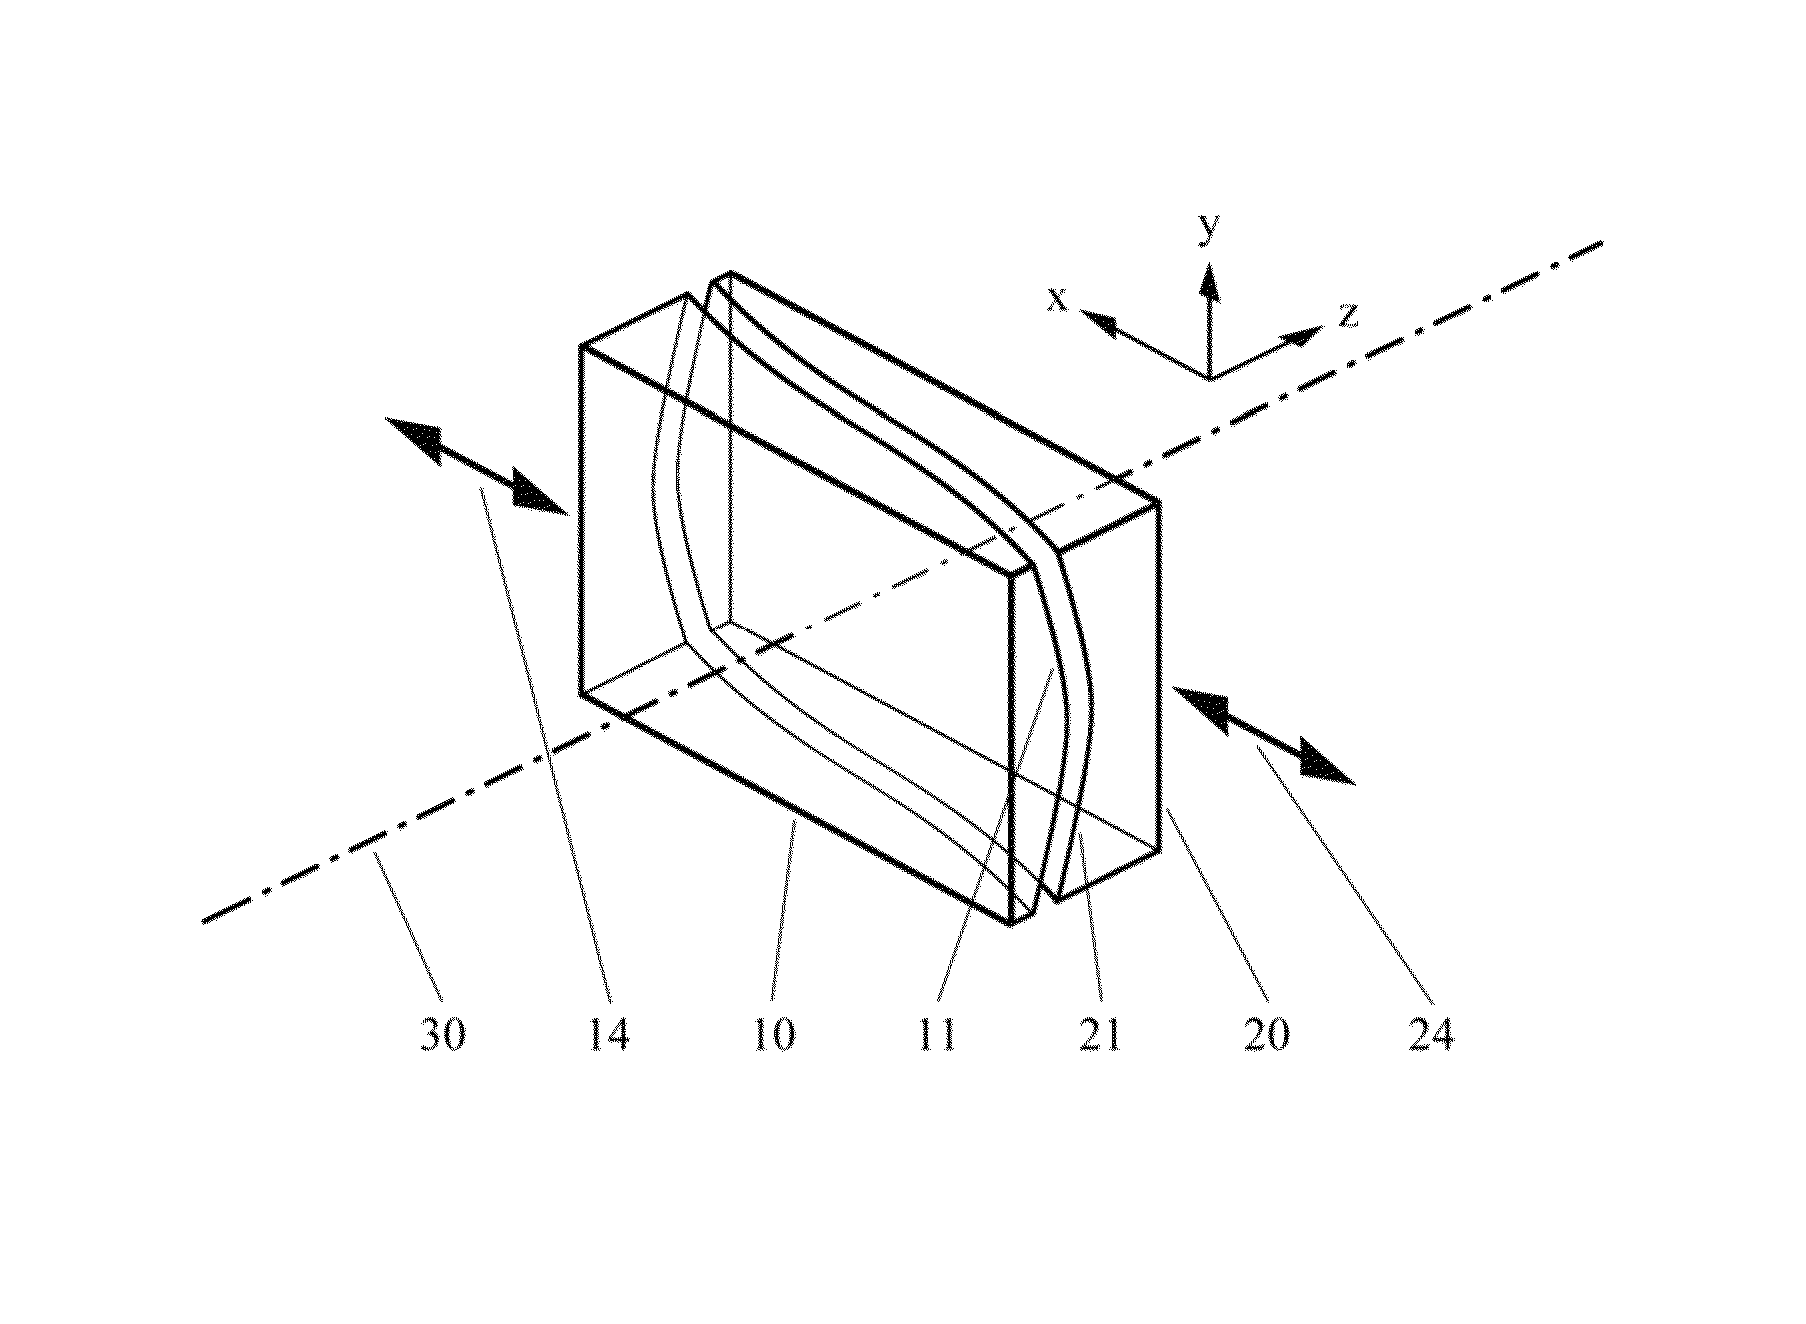 Optical device for beam shaping